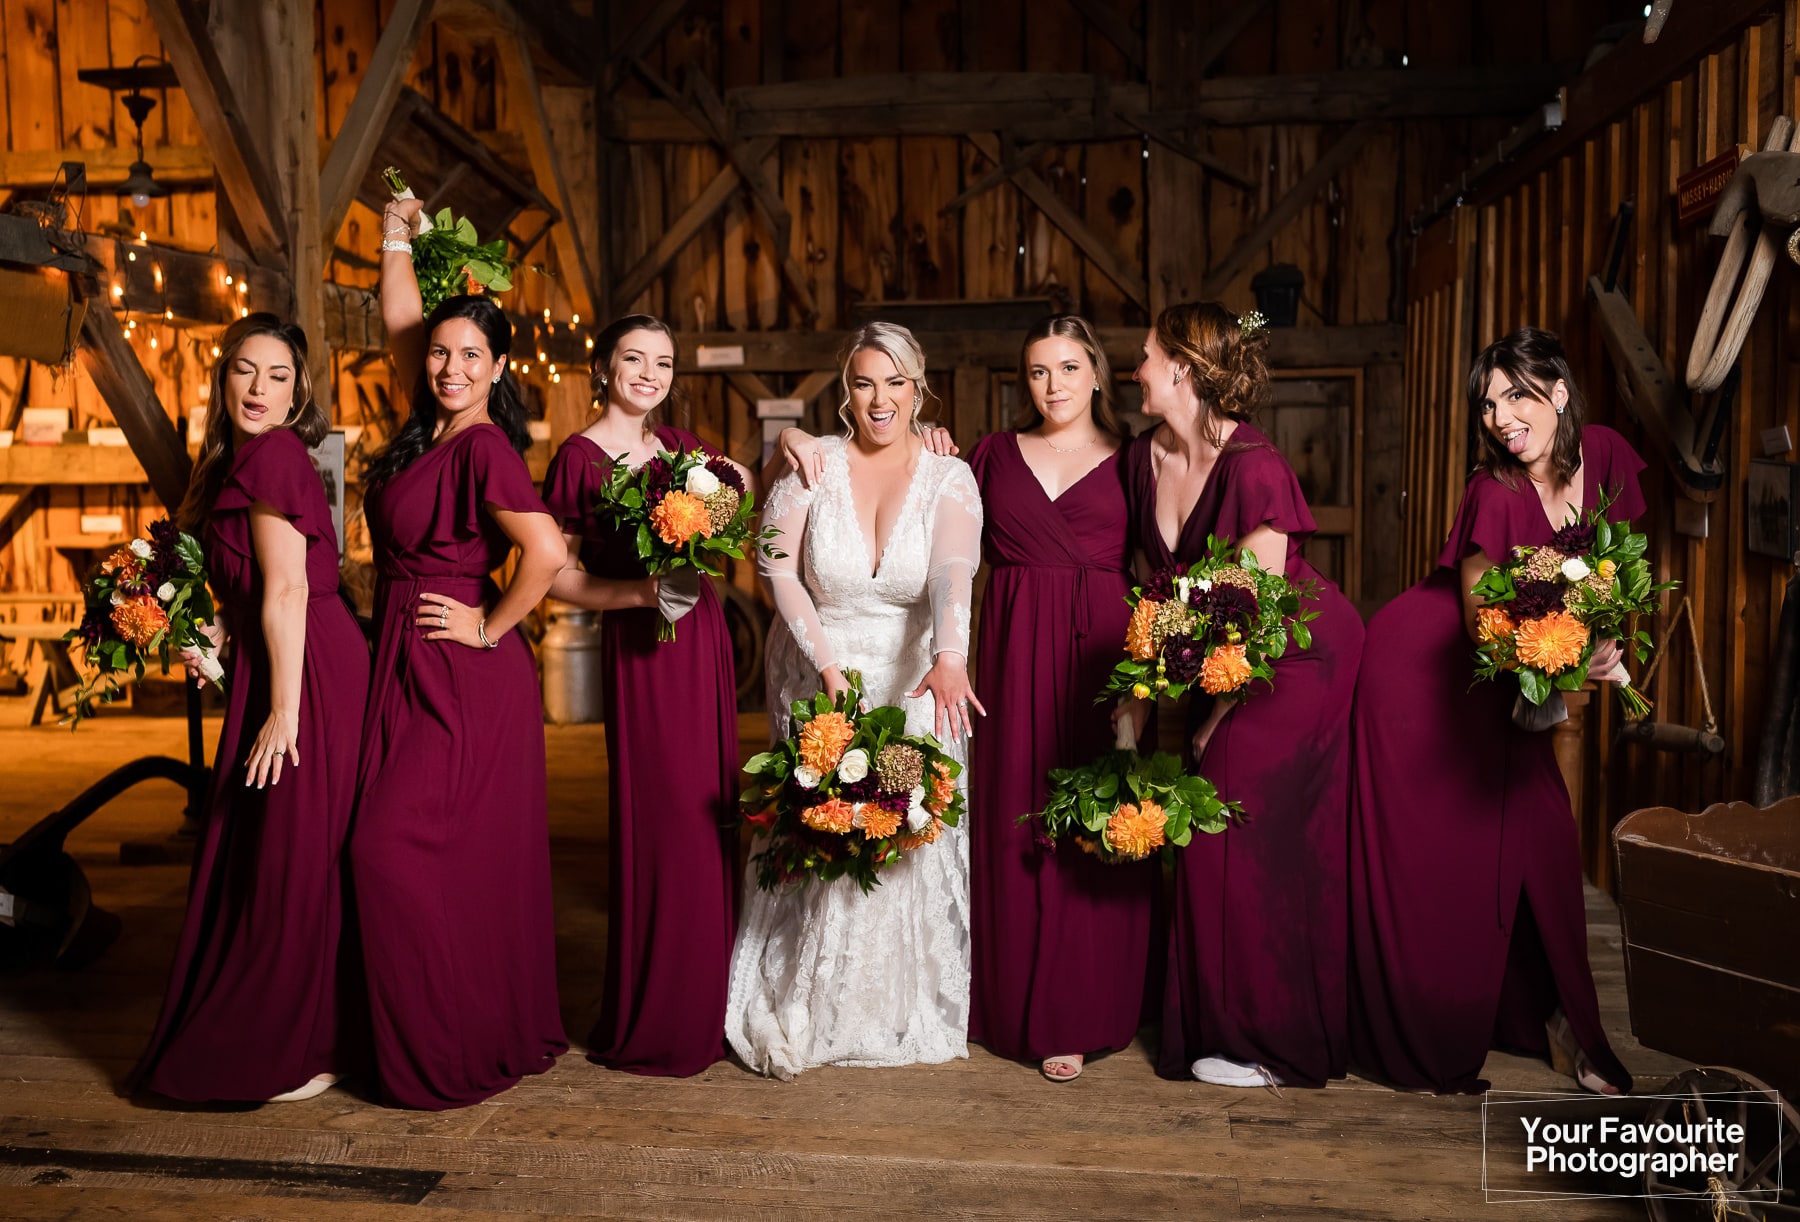 Wedding party photographed indoors in a barn, wearing burgundy